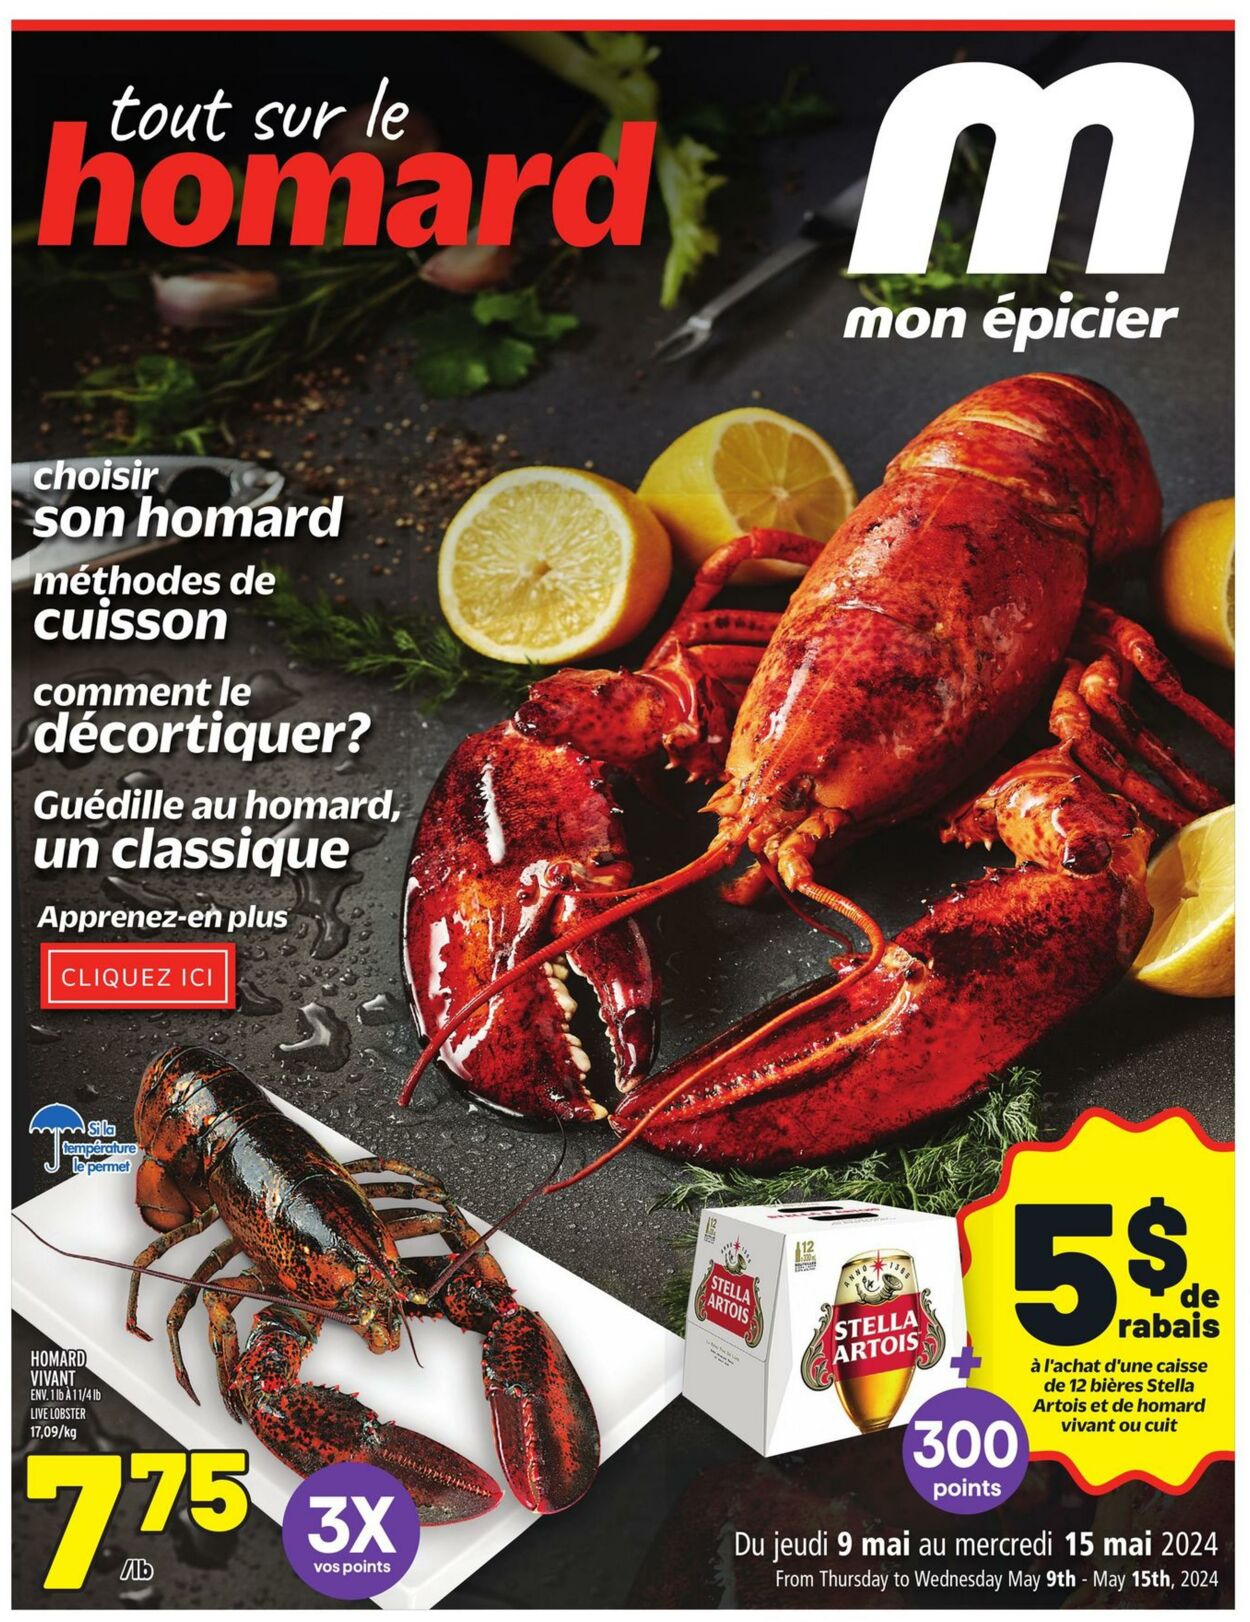 Flyer Metro - All About Lobster - Metro Plus 9 May 2024 - 15 May 2024